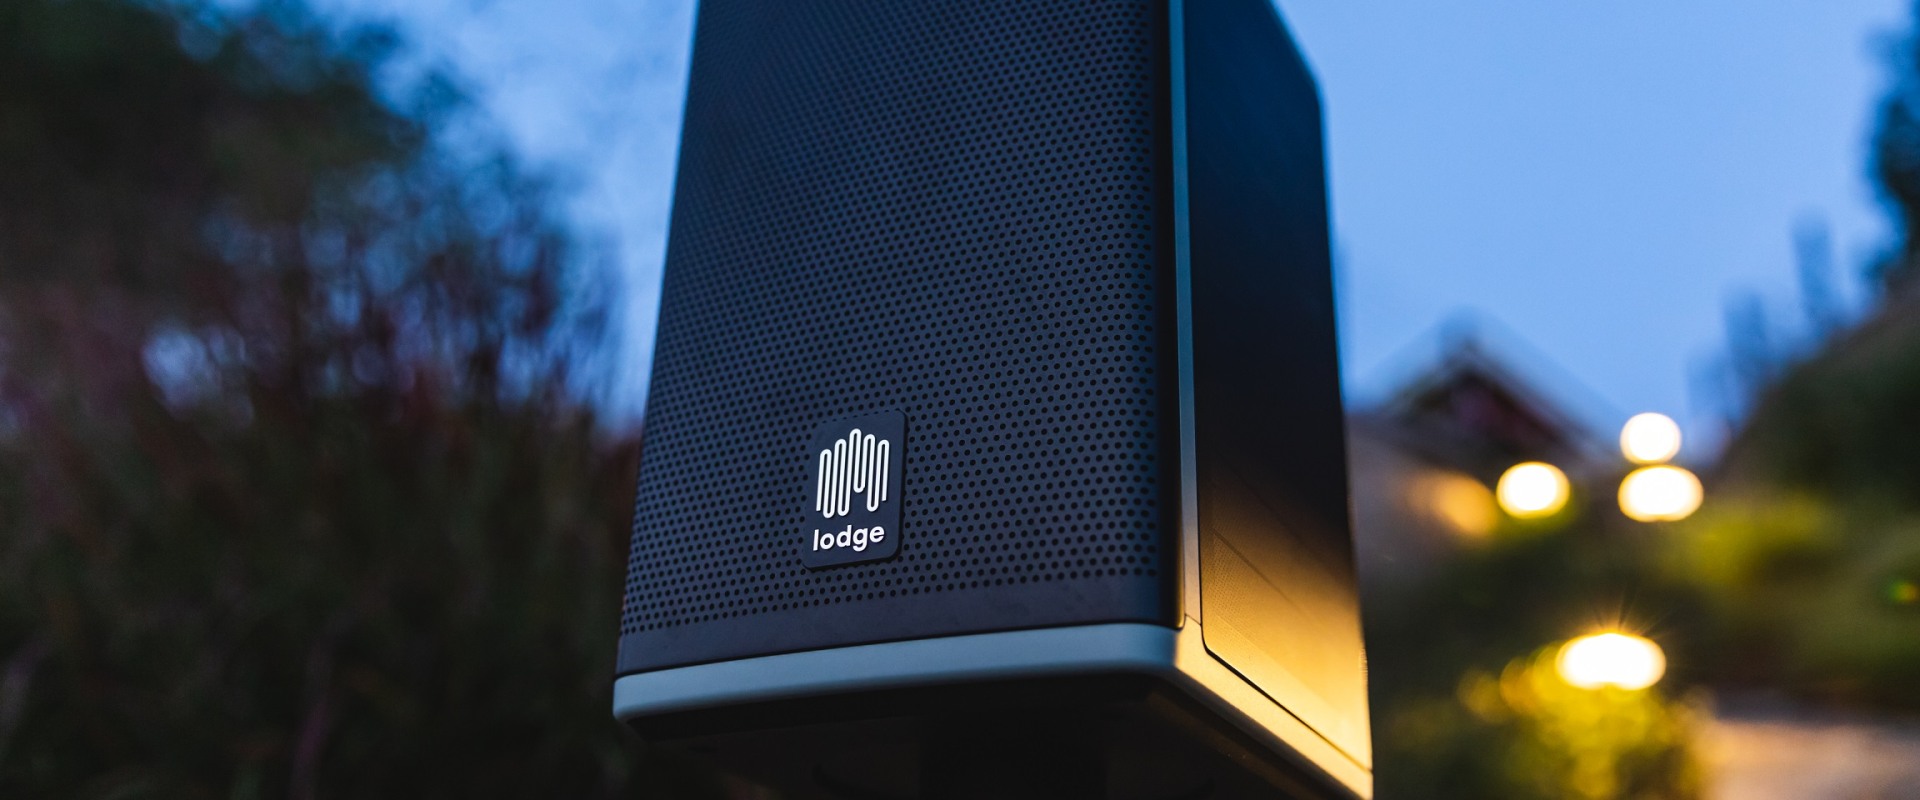 Reviews of Solar-Powered Speakers